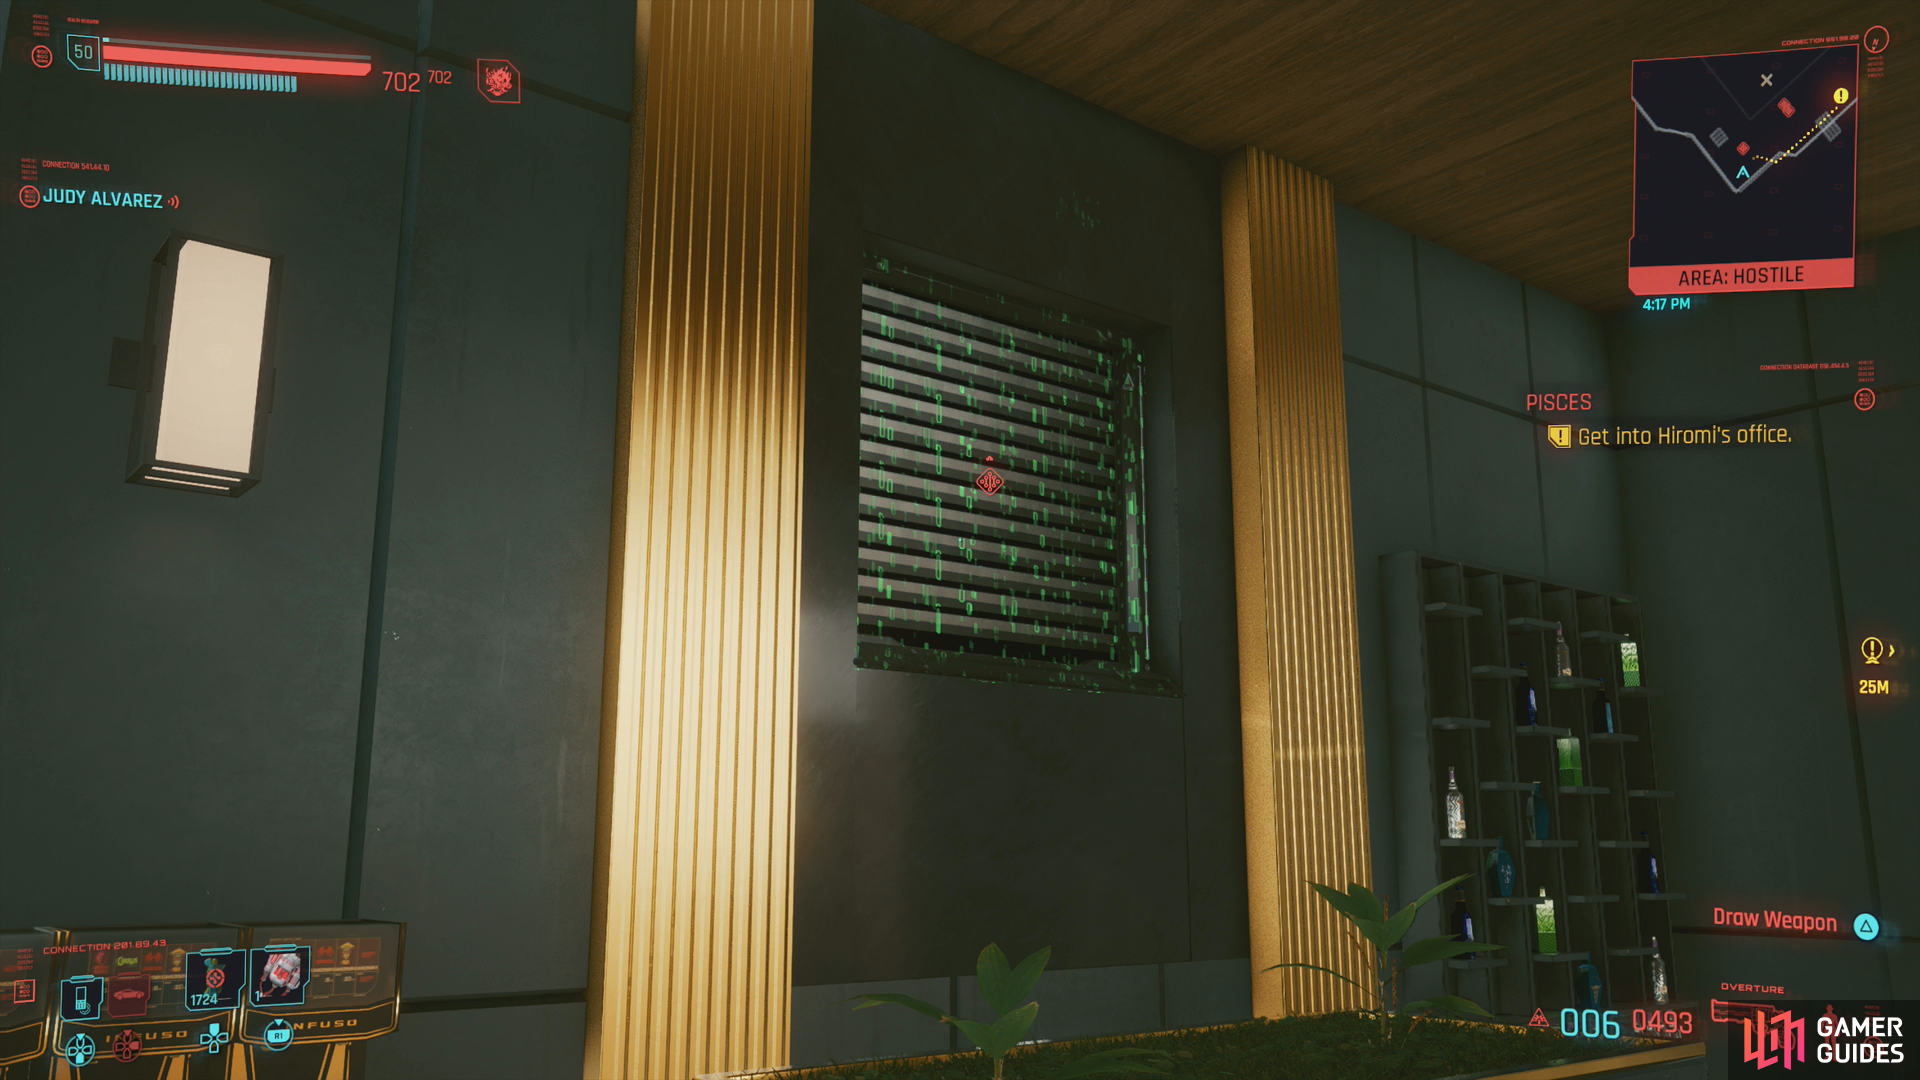 You can also sneak into the penthouse via a shuttered window.